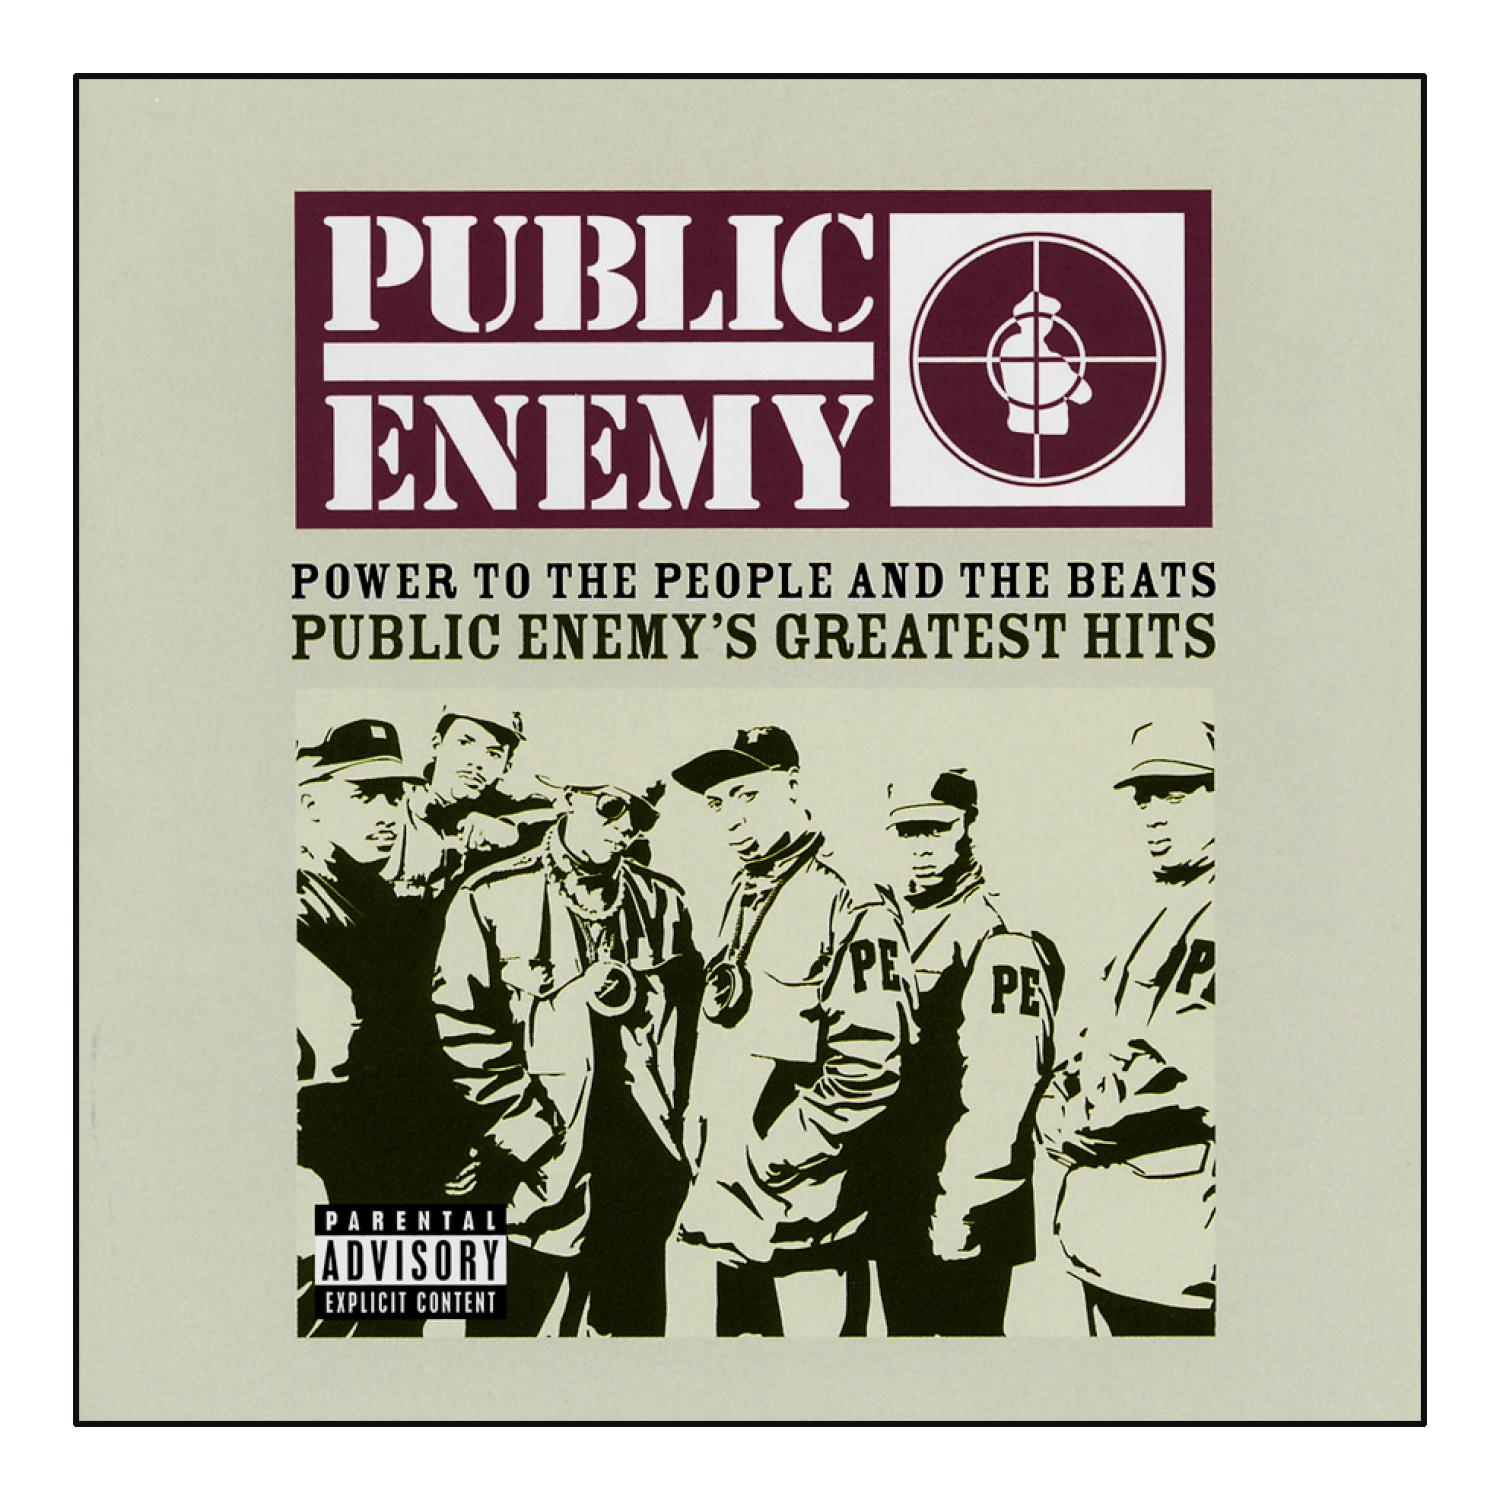 People (CD) - Power To Public And Enemy The (Greatest Hits) - The Beats